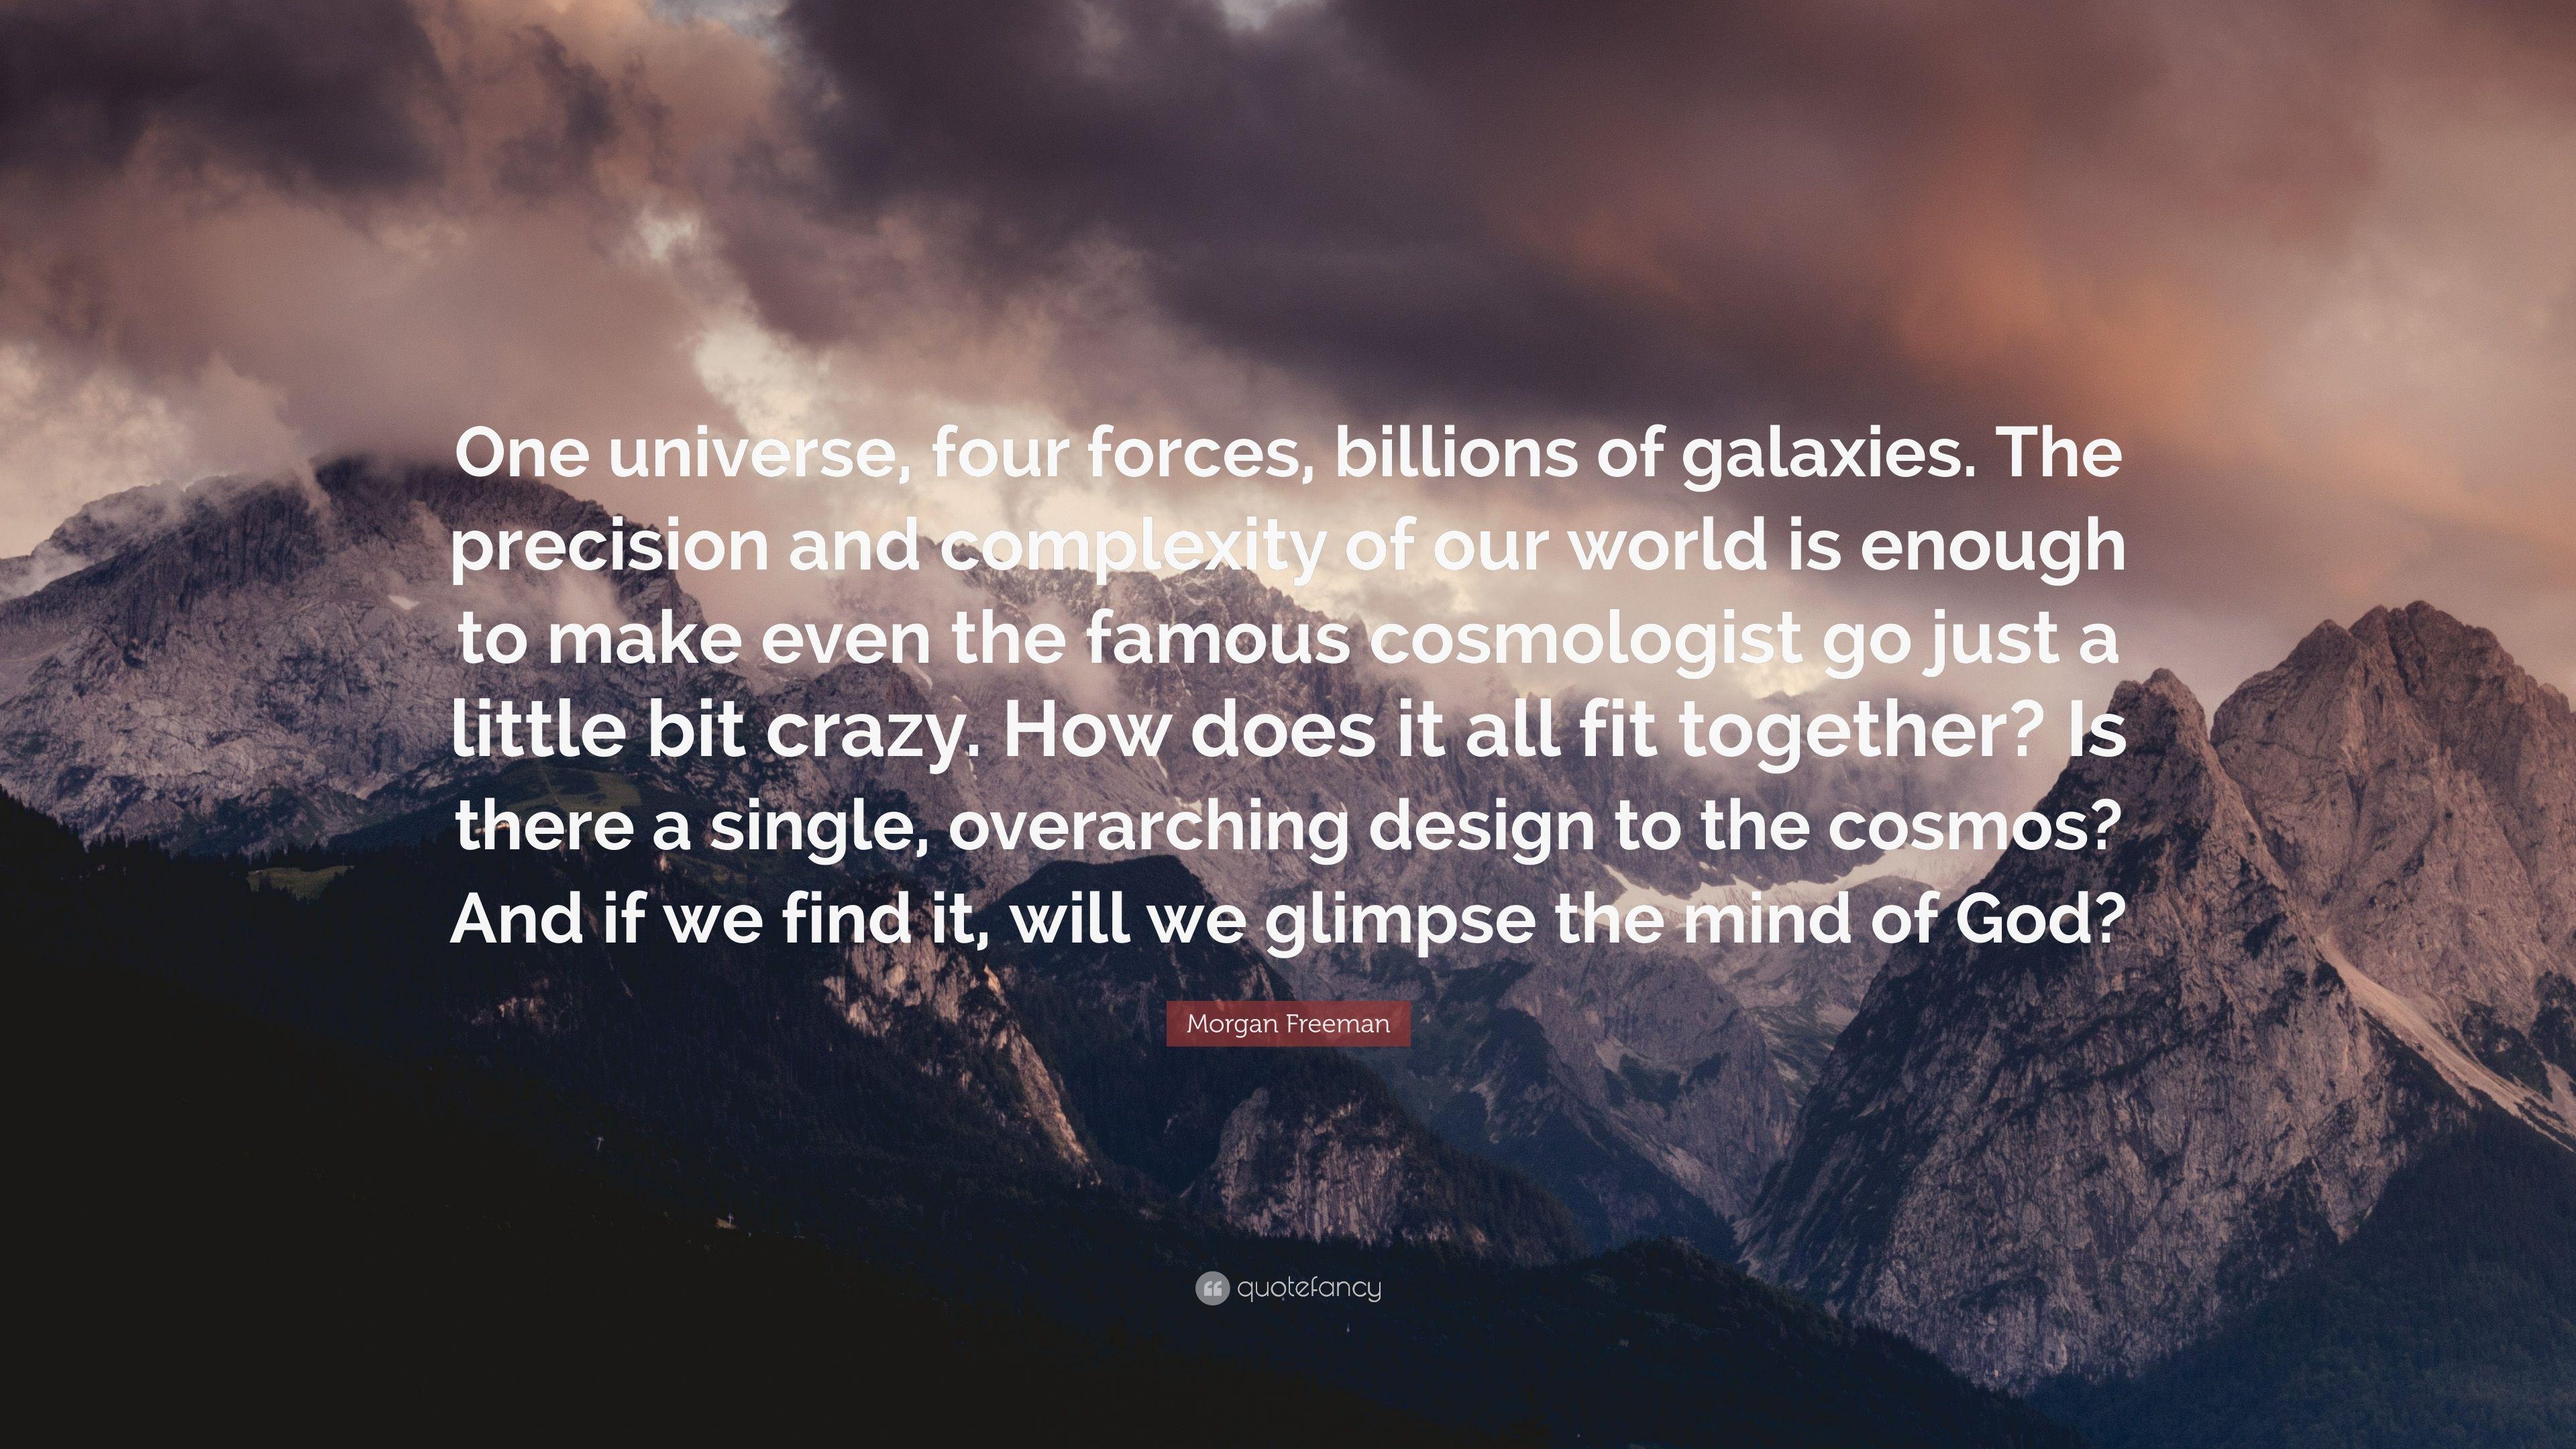 Morgan Freeman Quote: “One universe, four forces, billions